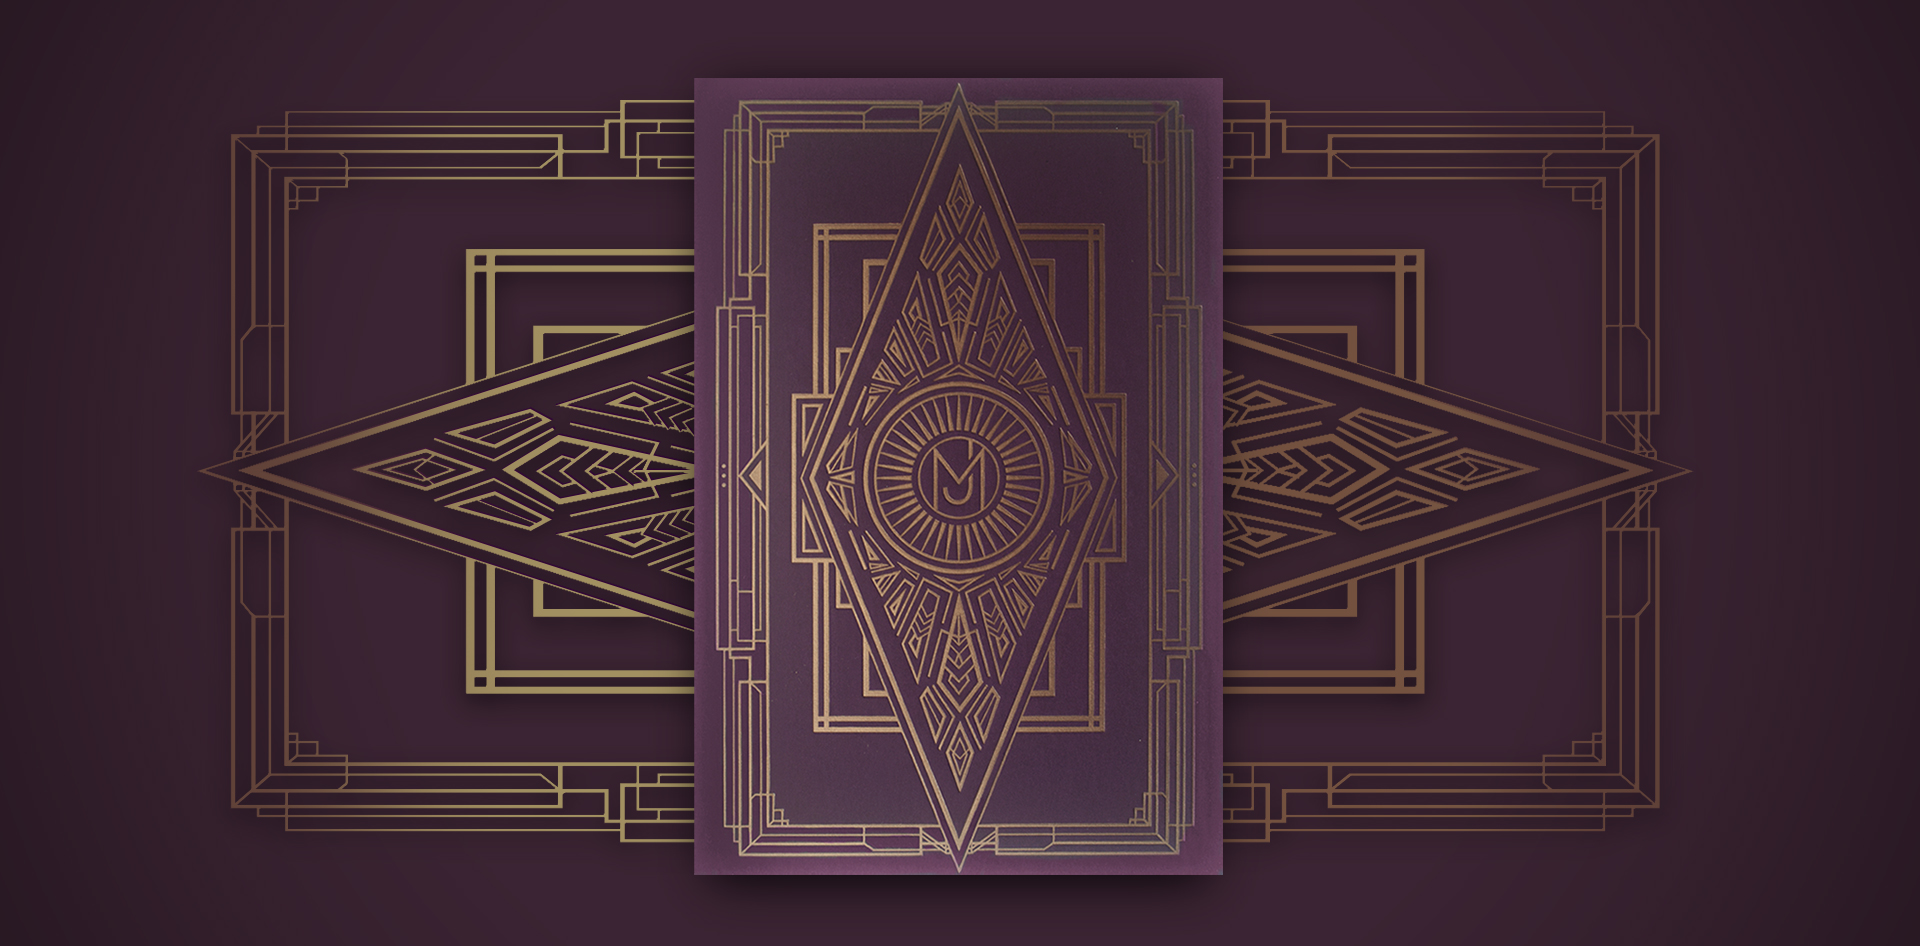 Art Deco geometry on the back of the invitation